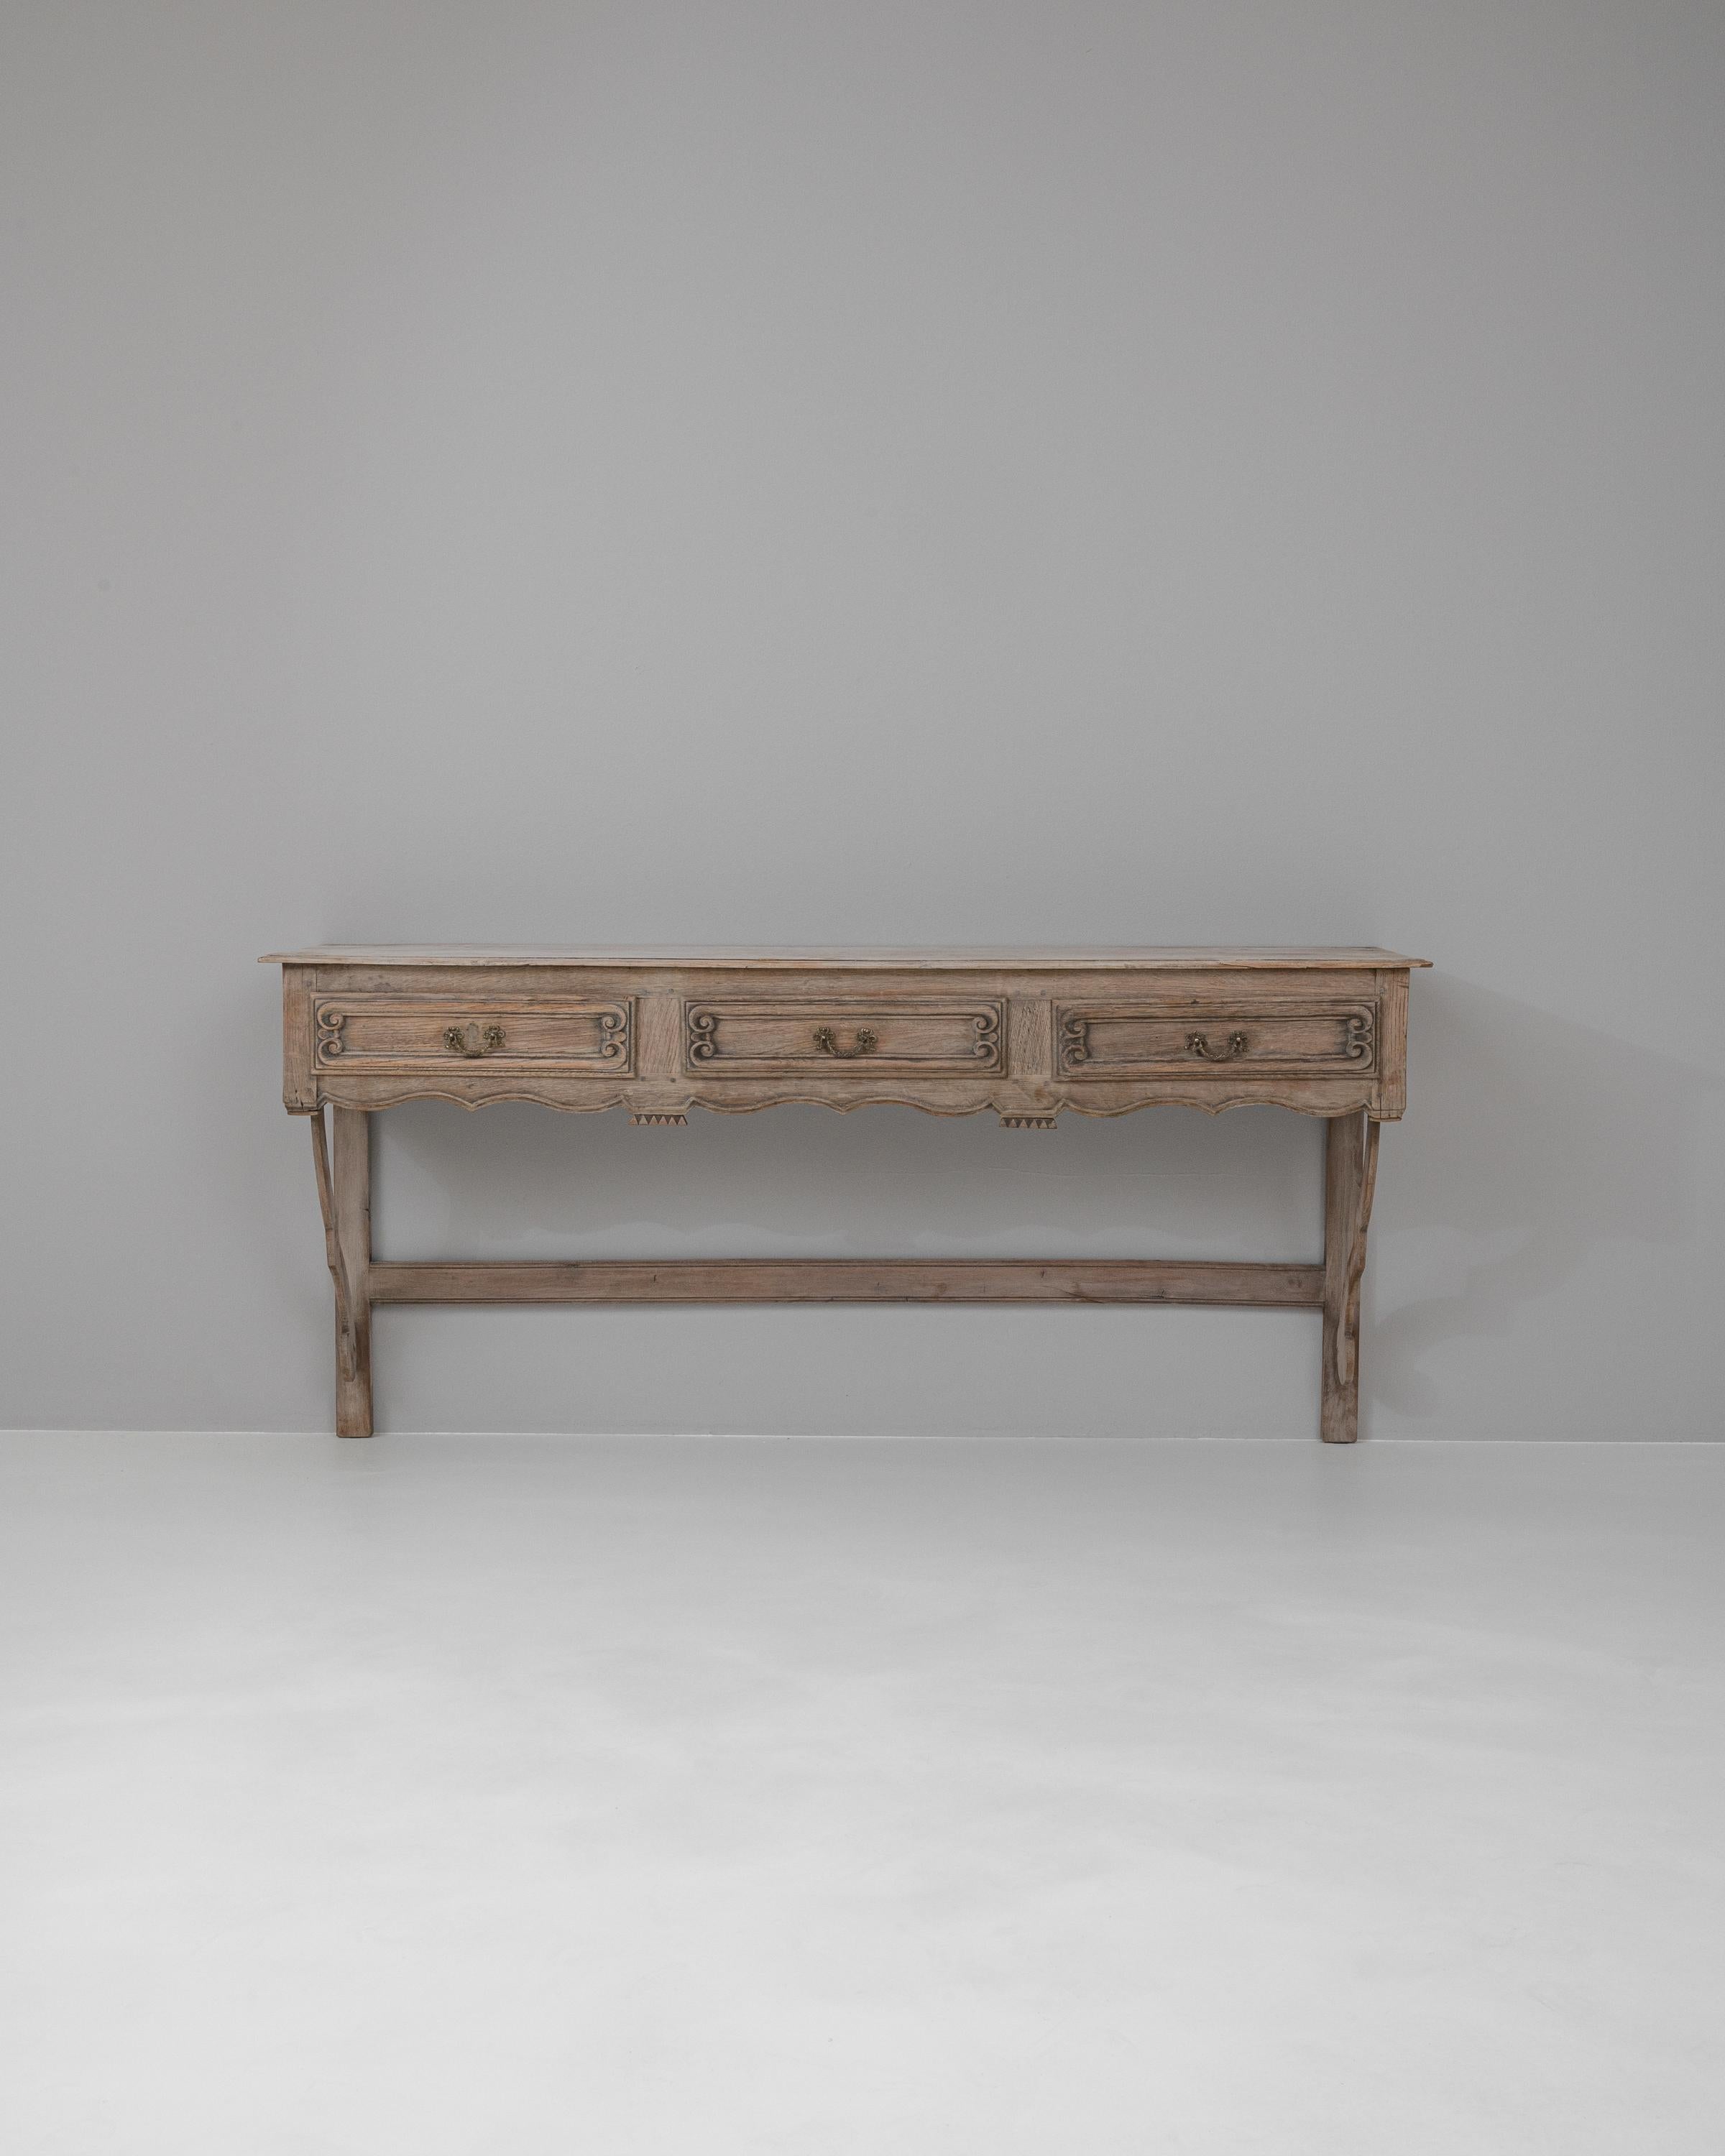 Elevate your home with the refined elegance of this 19th Century French Bleached Oak Console Table. This piece exudes a quiet sophistication with its gracefully carved silhouette and the soft, sun-kissed hues of bleached oak. The twin drawers are